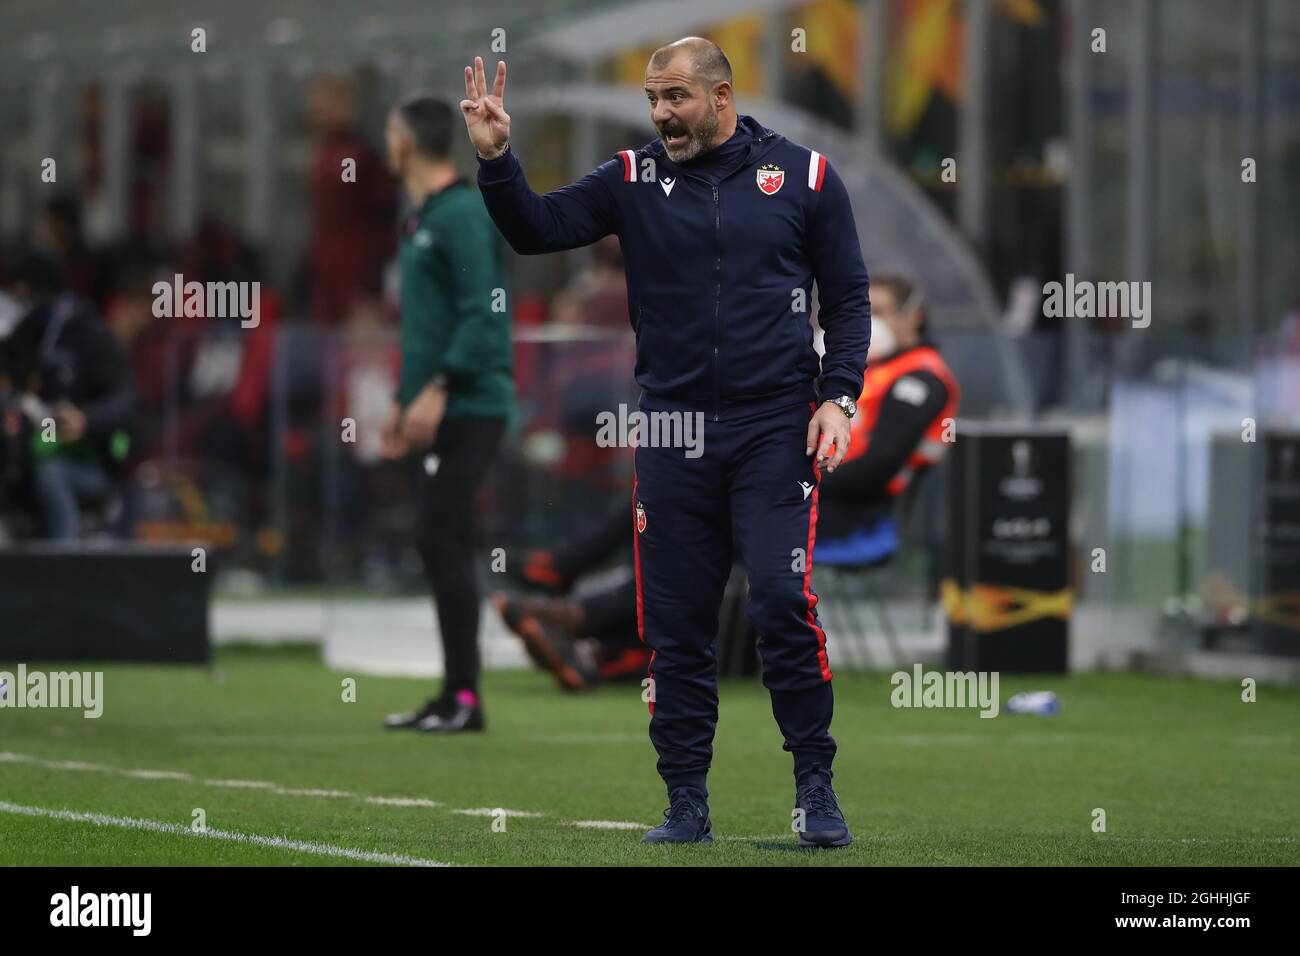 Dejan Stankovic Head coach of FK Crvena zvezda reacts during the UEFA  Champions League match at Giuseppe Meazza, Milan. Picture date: 25th  February 2021. Picture credit should read: Jonathan Moscrop/Sportimage via  PA